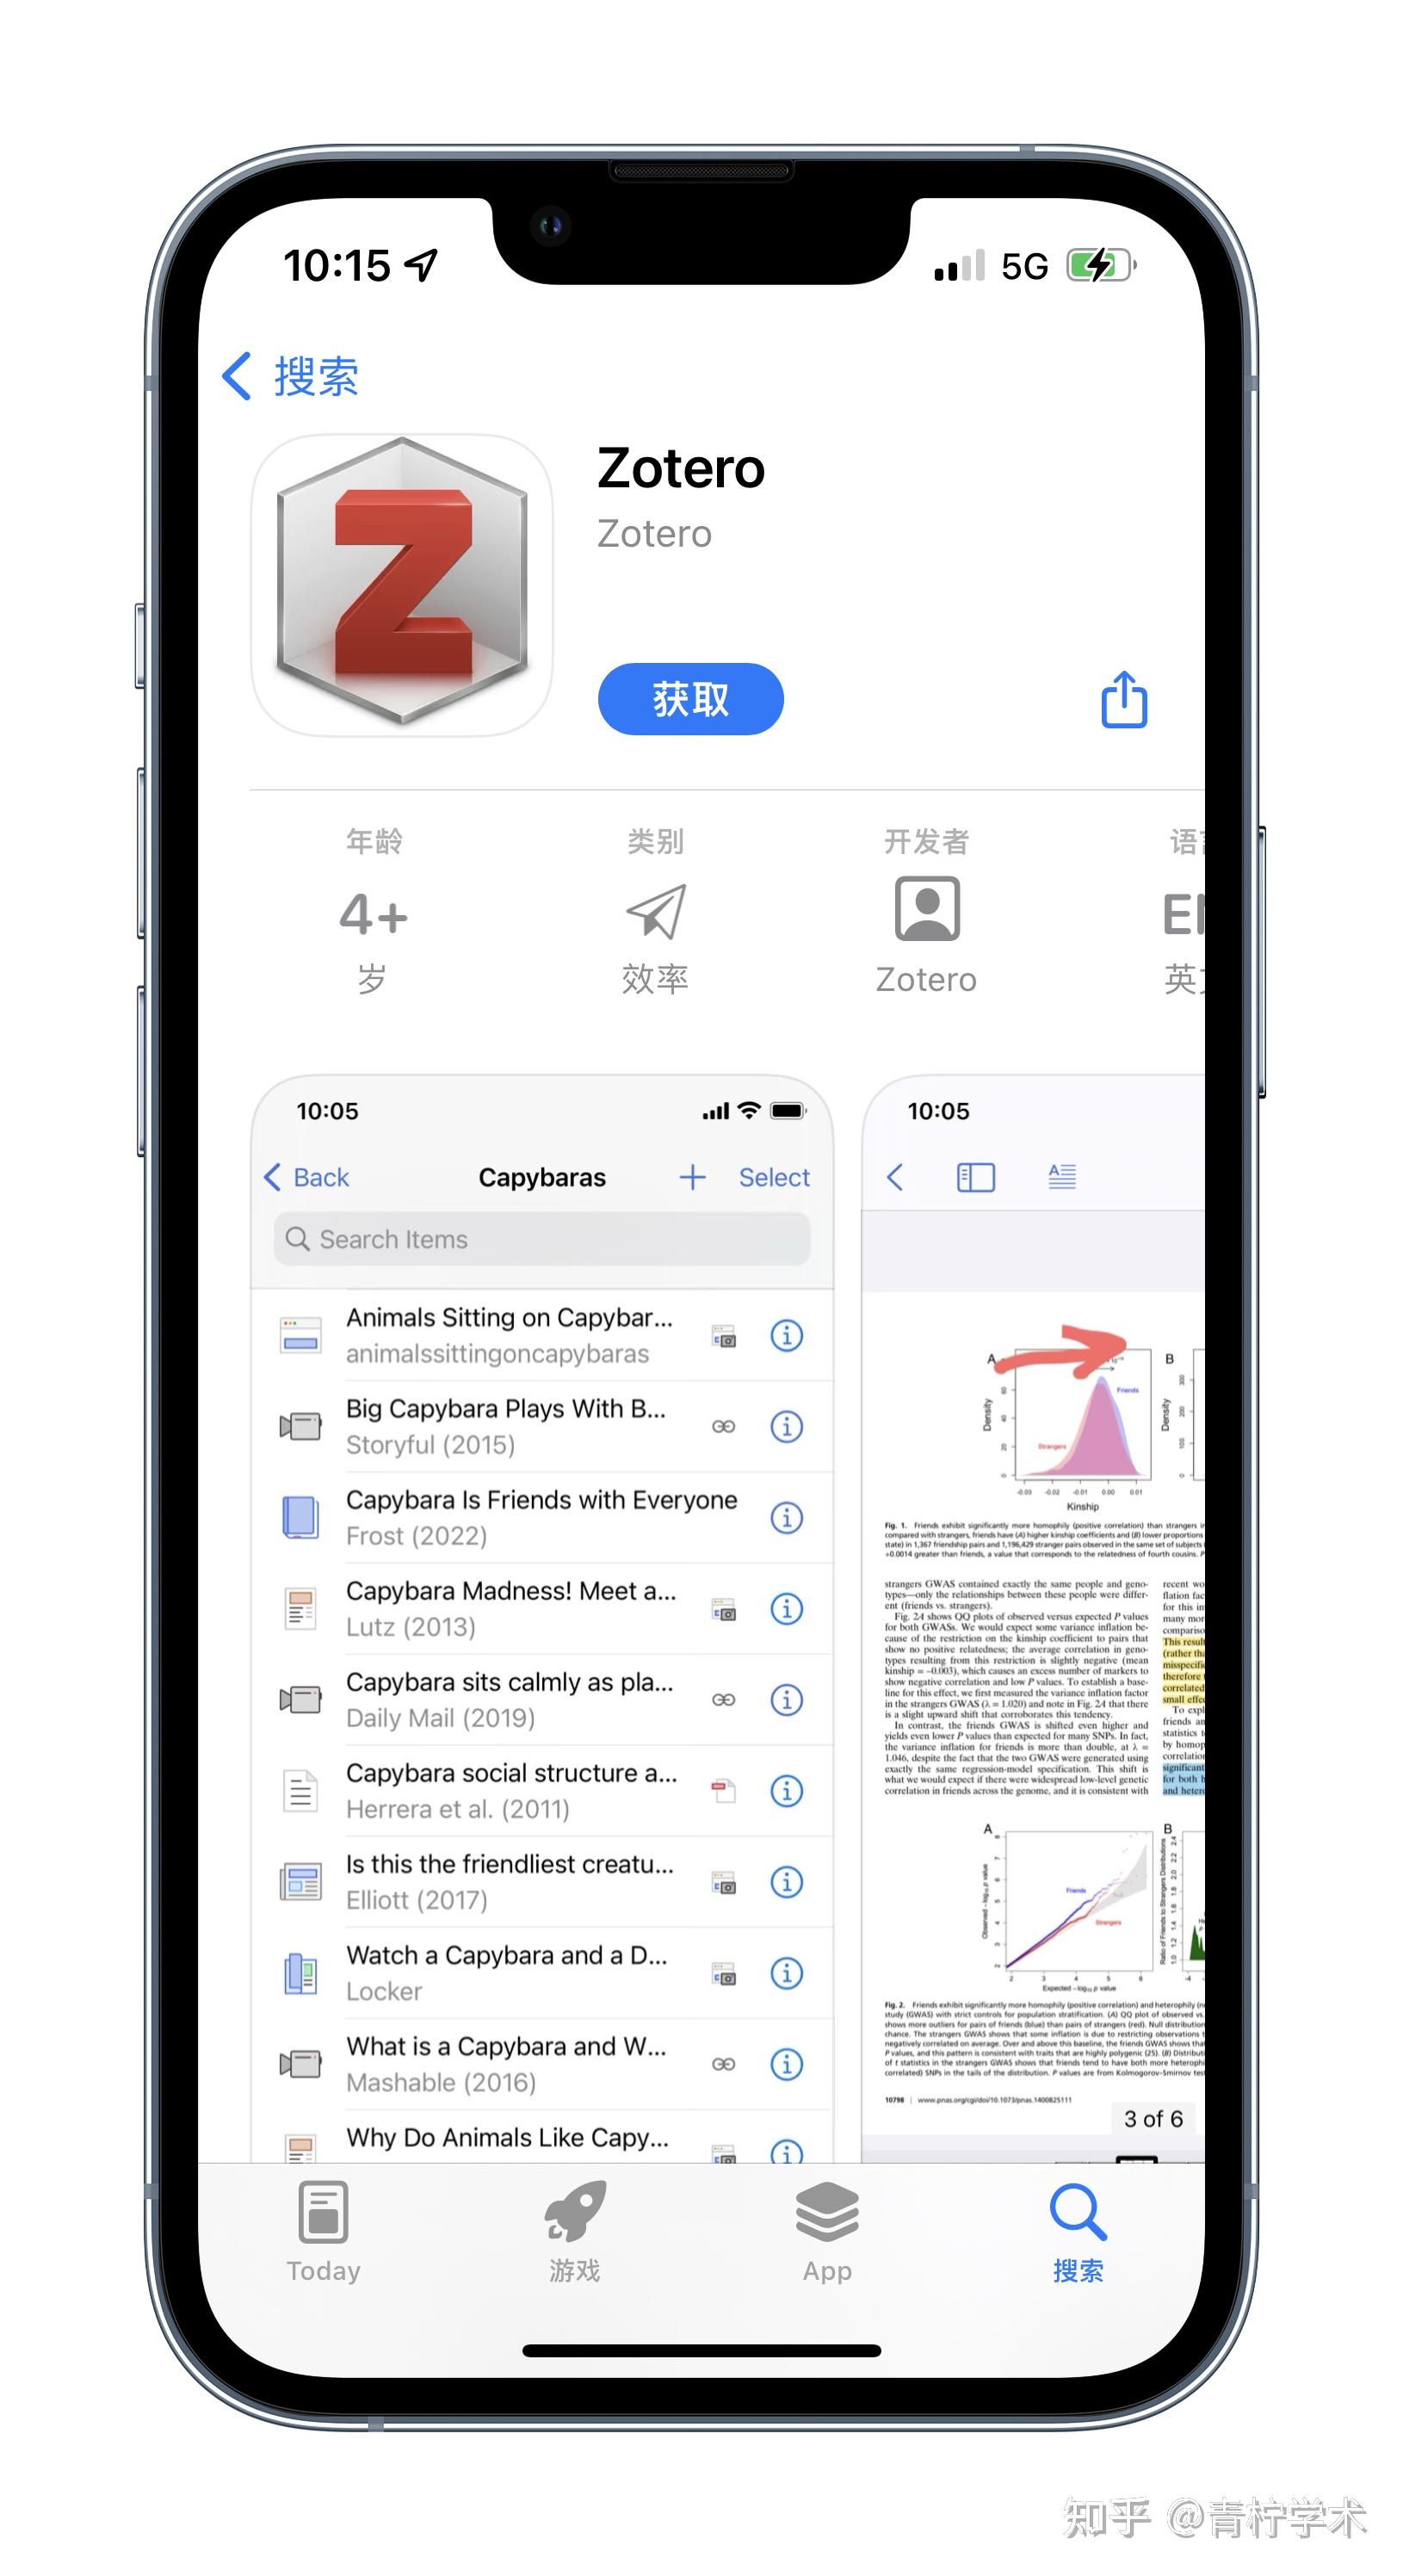 download the new version for ios Zotero 6.0.27